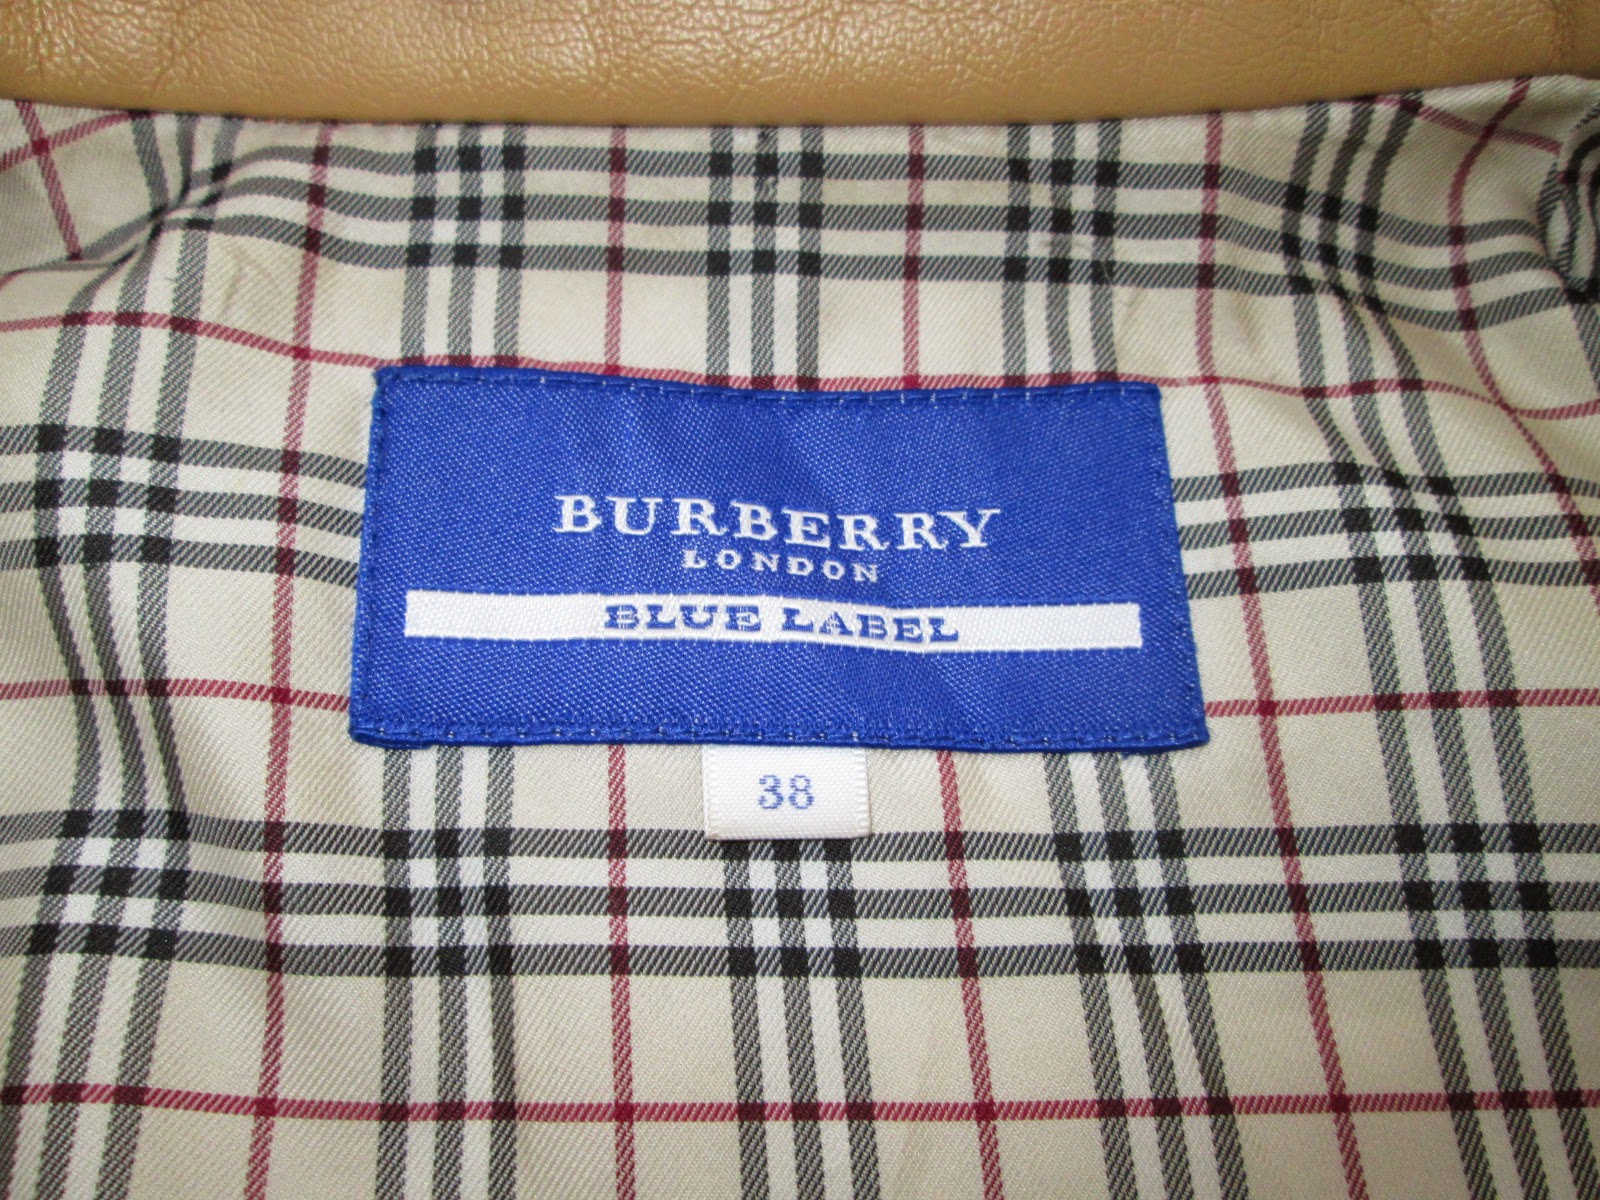 d0rayakEEbaG: Authentic Burberry Blue Label Leather Jacket(SOLD)